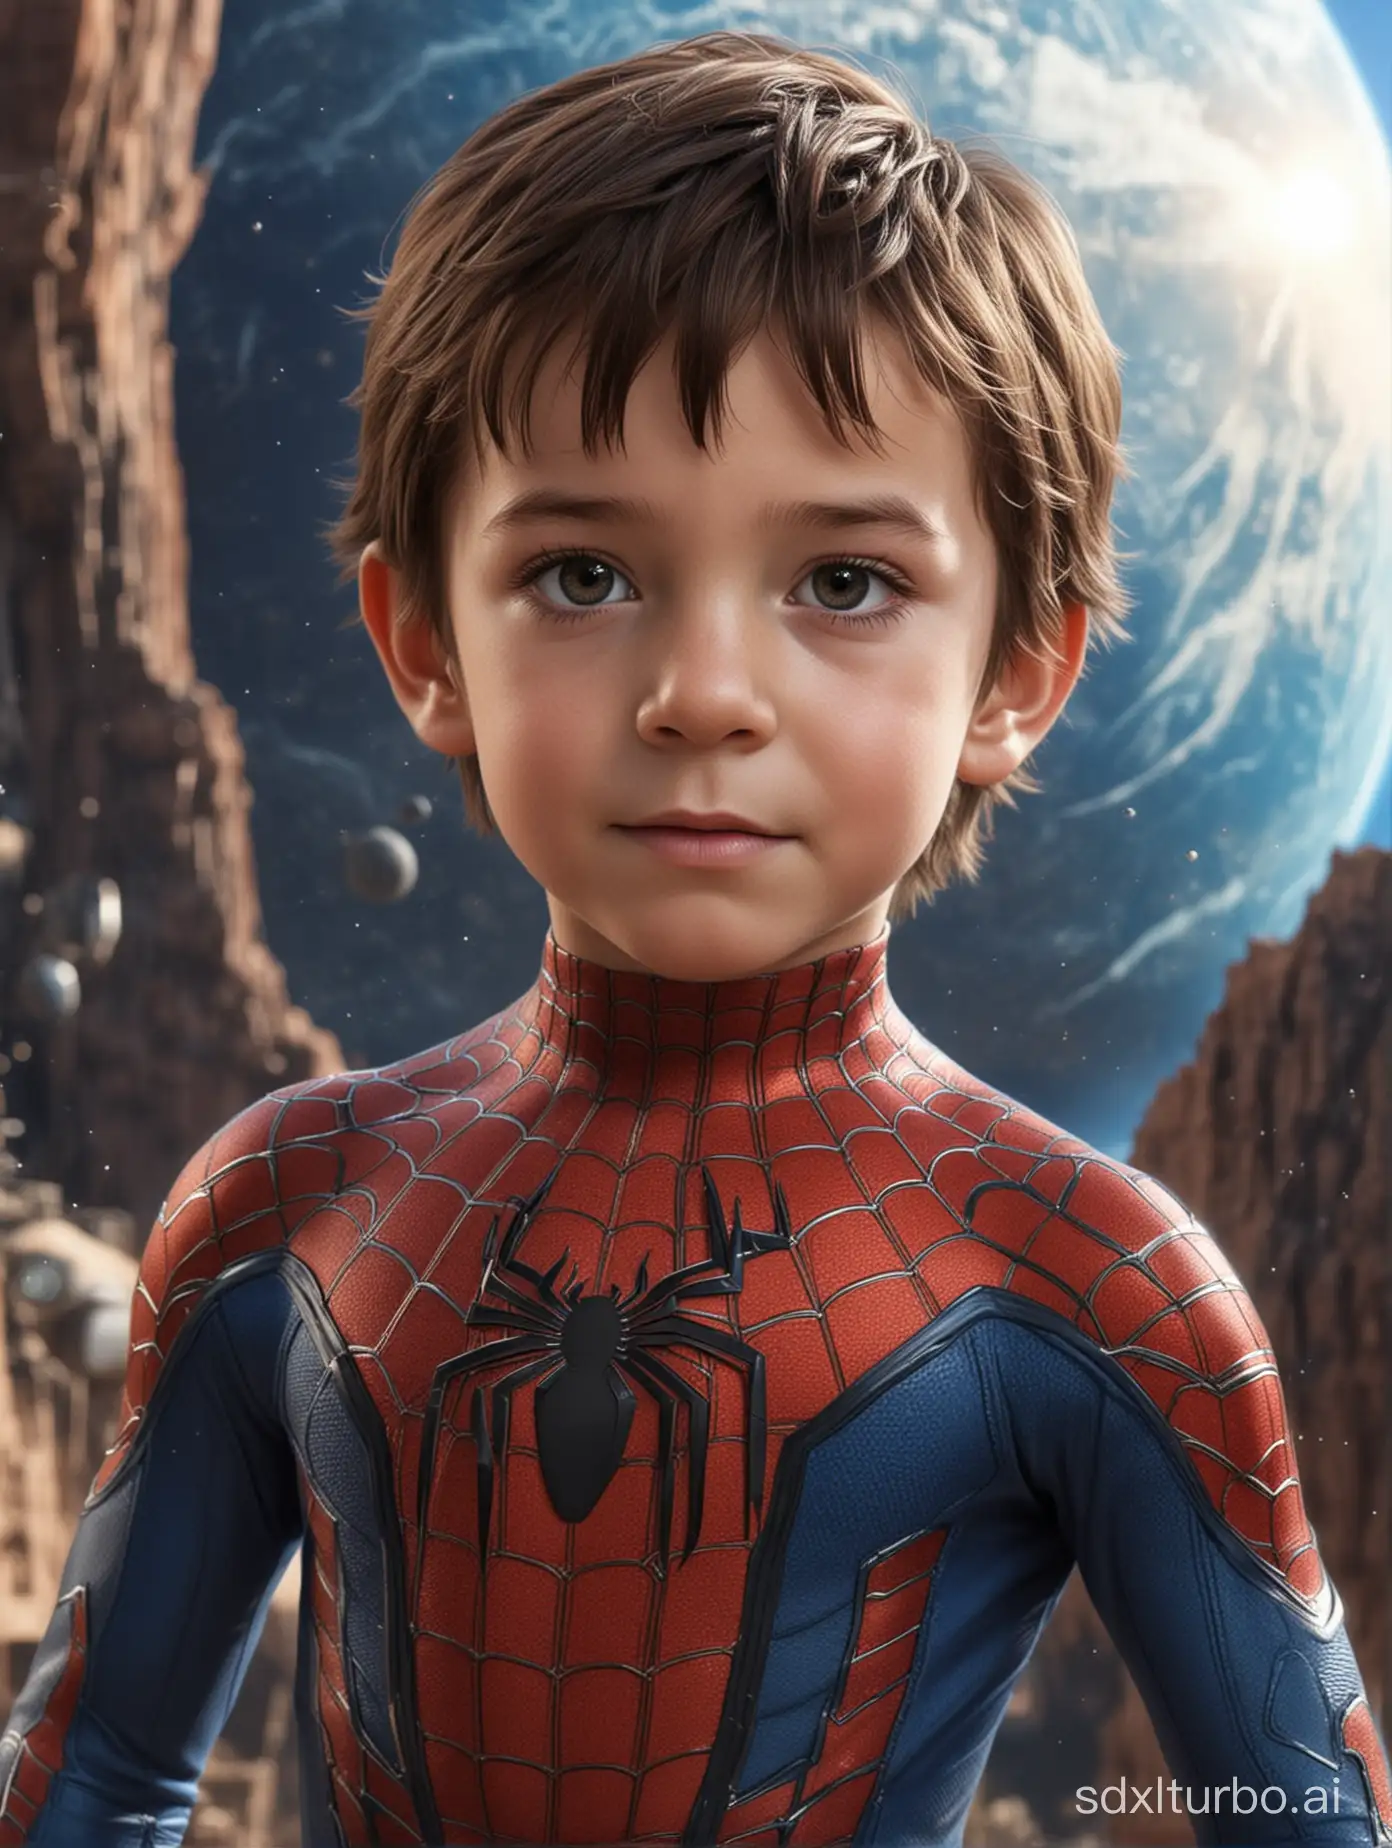 Sci-fi, a child wearing Spider-Man's tight-fitting suit, can see facial features and hair, background is a blue planet,